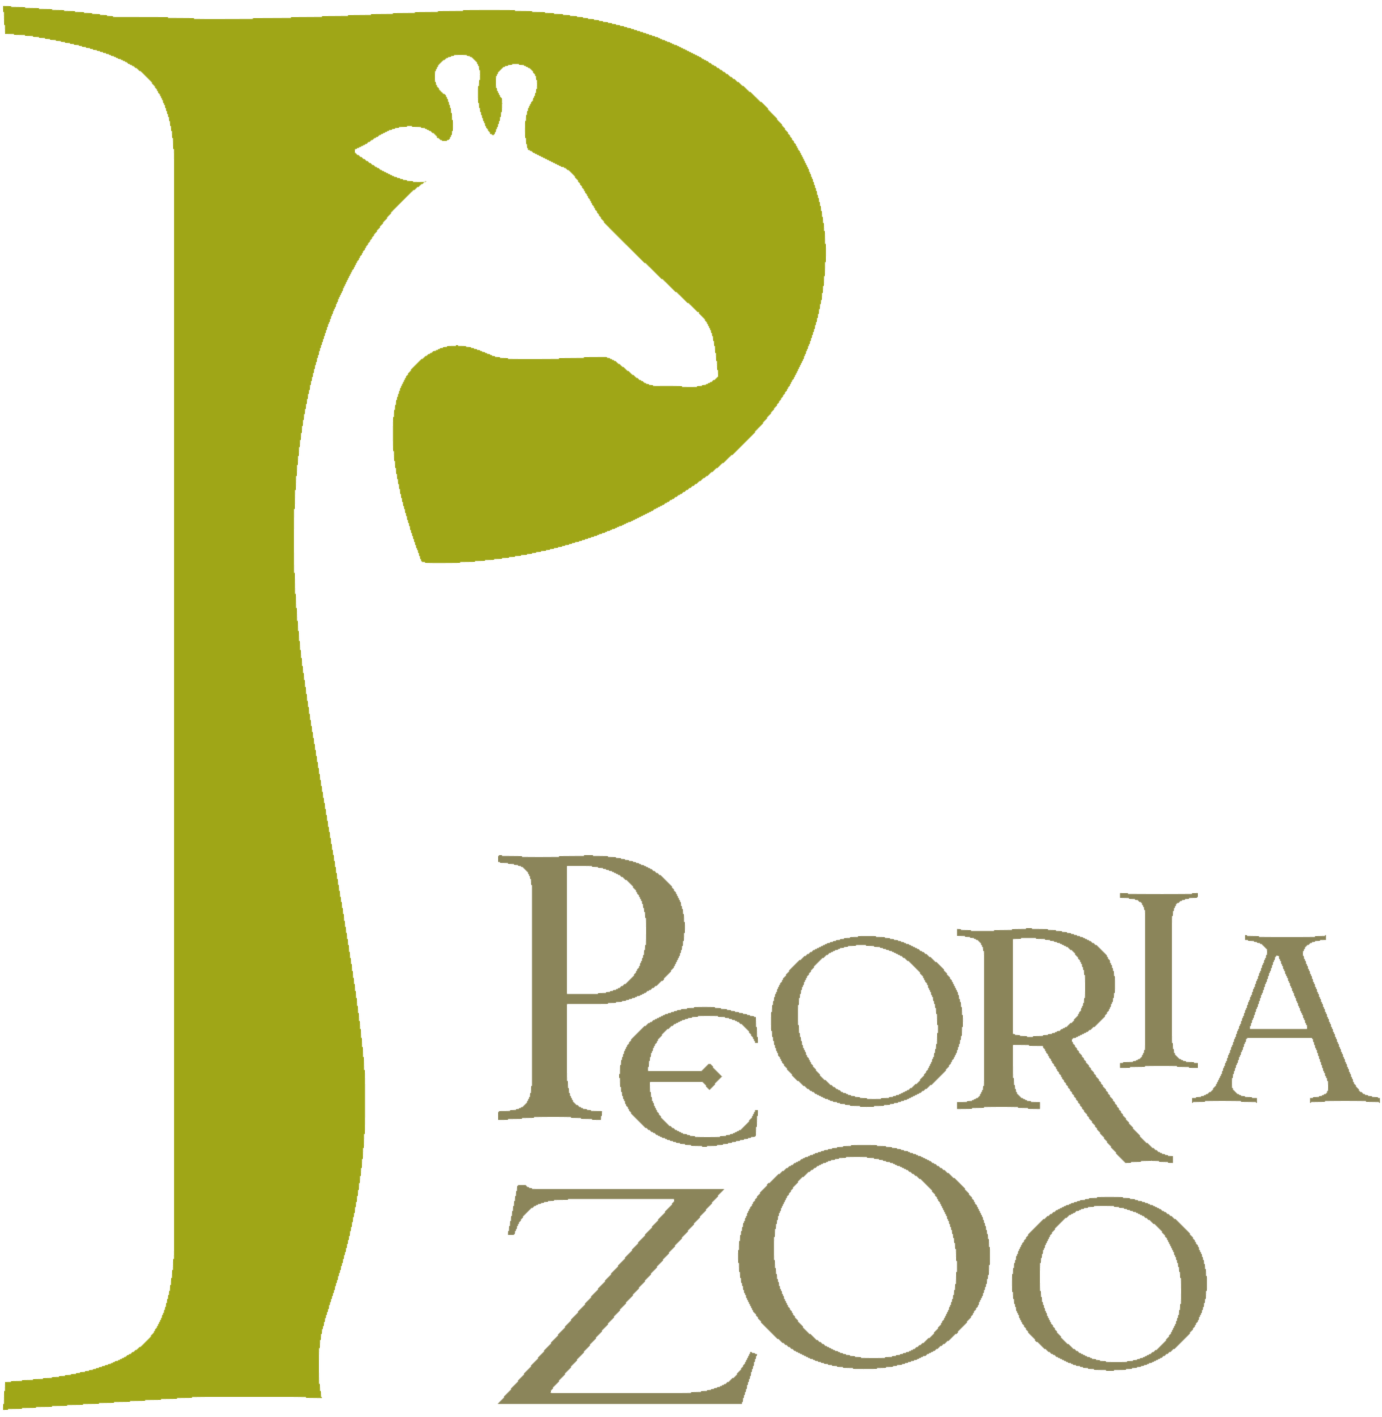 Peoria Zoo Weights and Measurements - Peoria Zoo